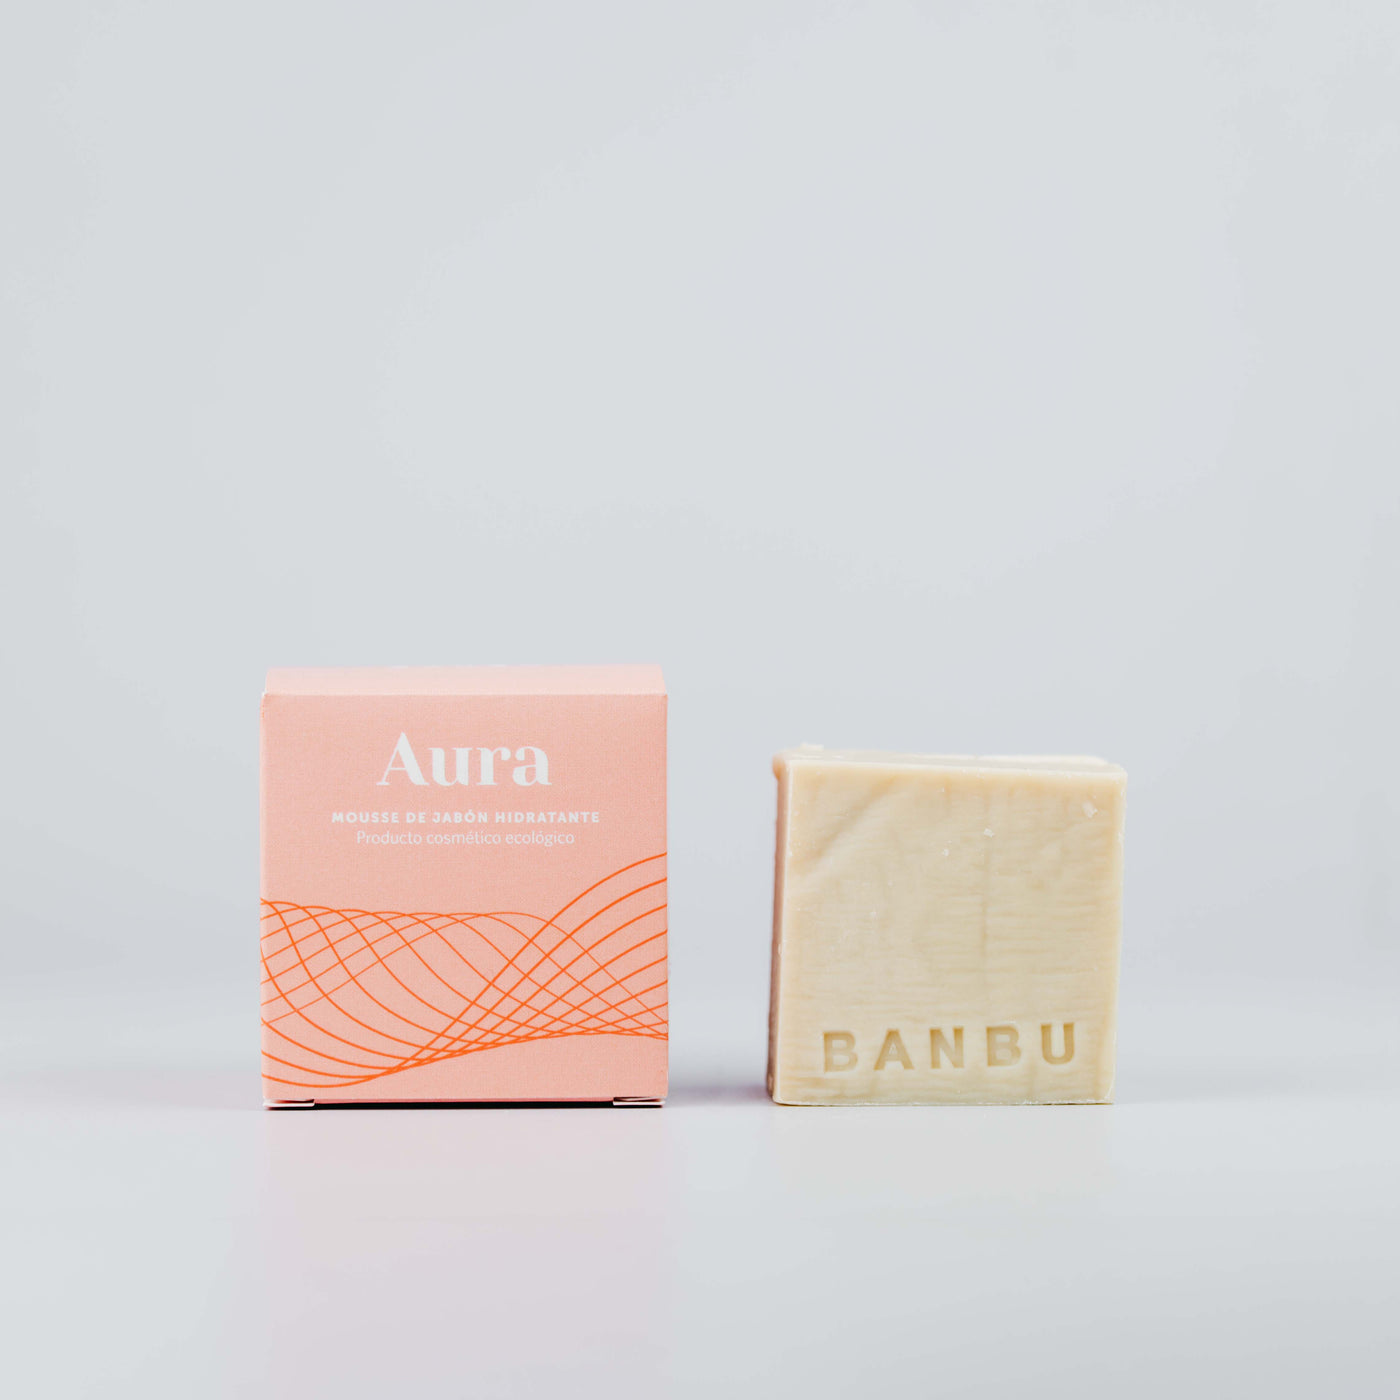 Aura Facial Cleansing Soap - Roses & Chains | Fashionable Clothing, Shoes, Accessories, & More